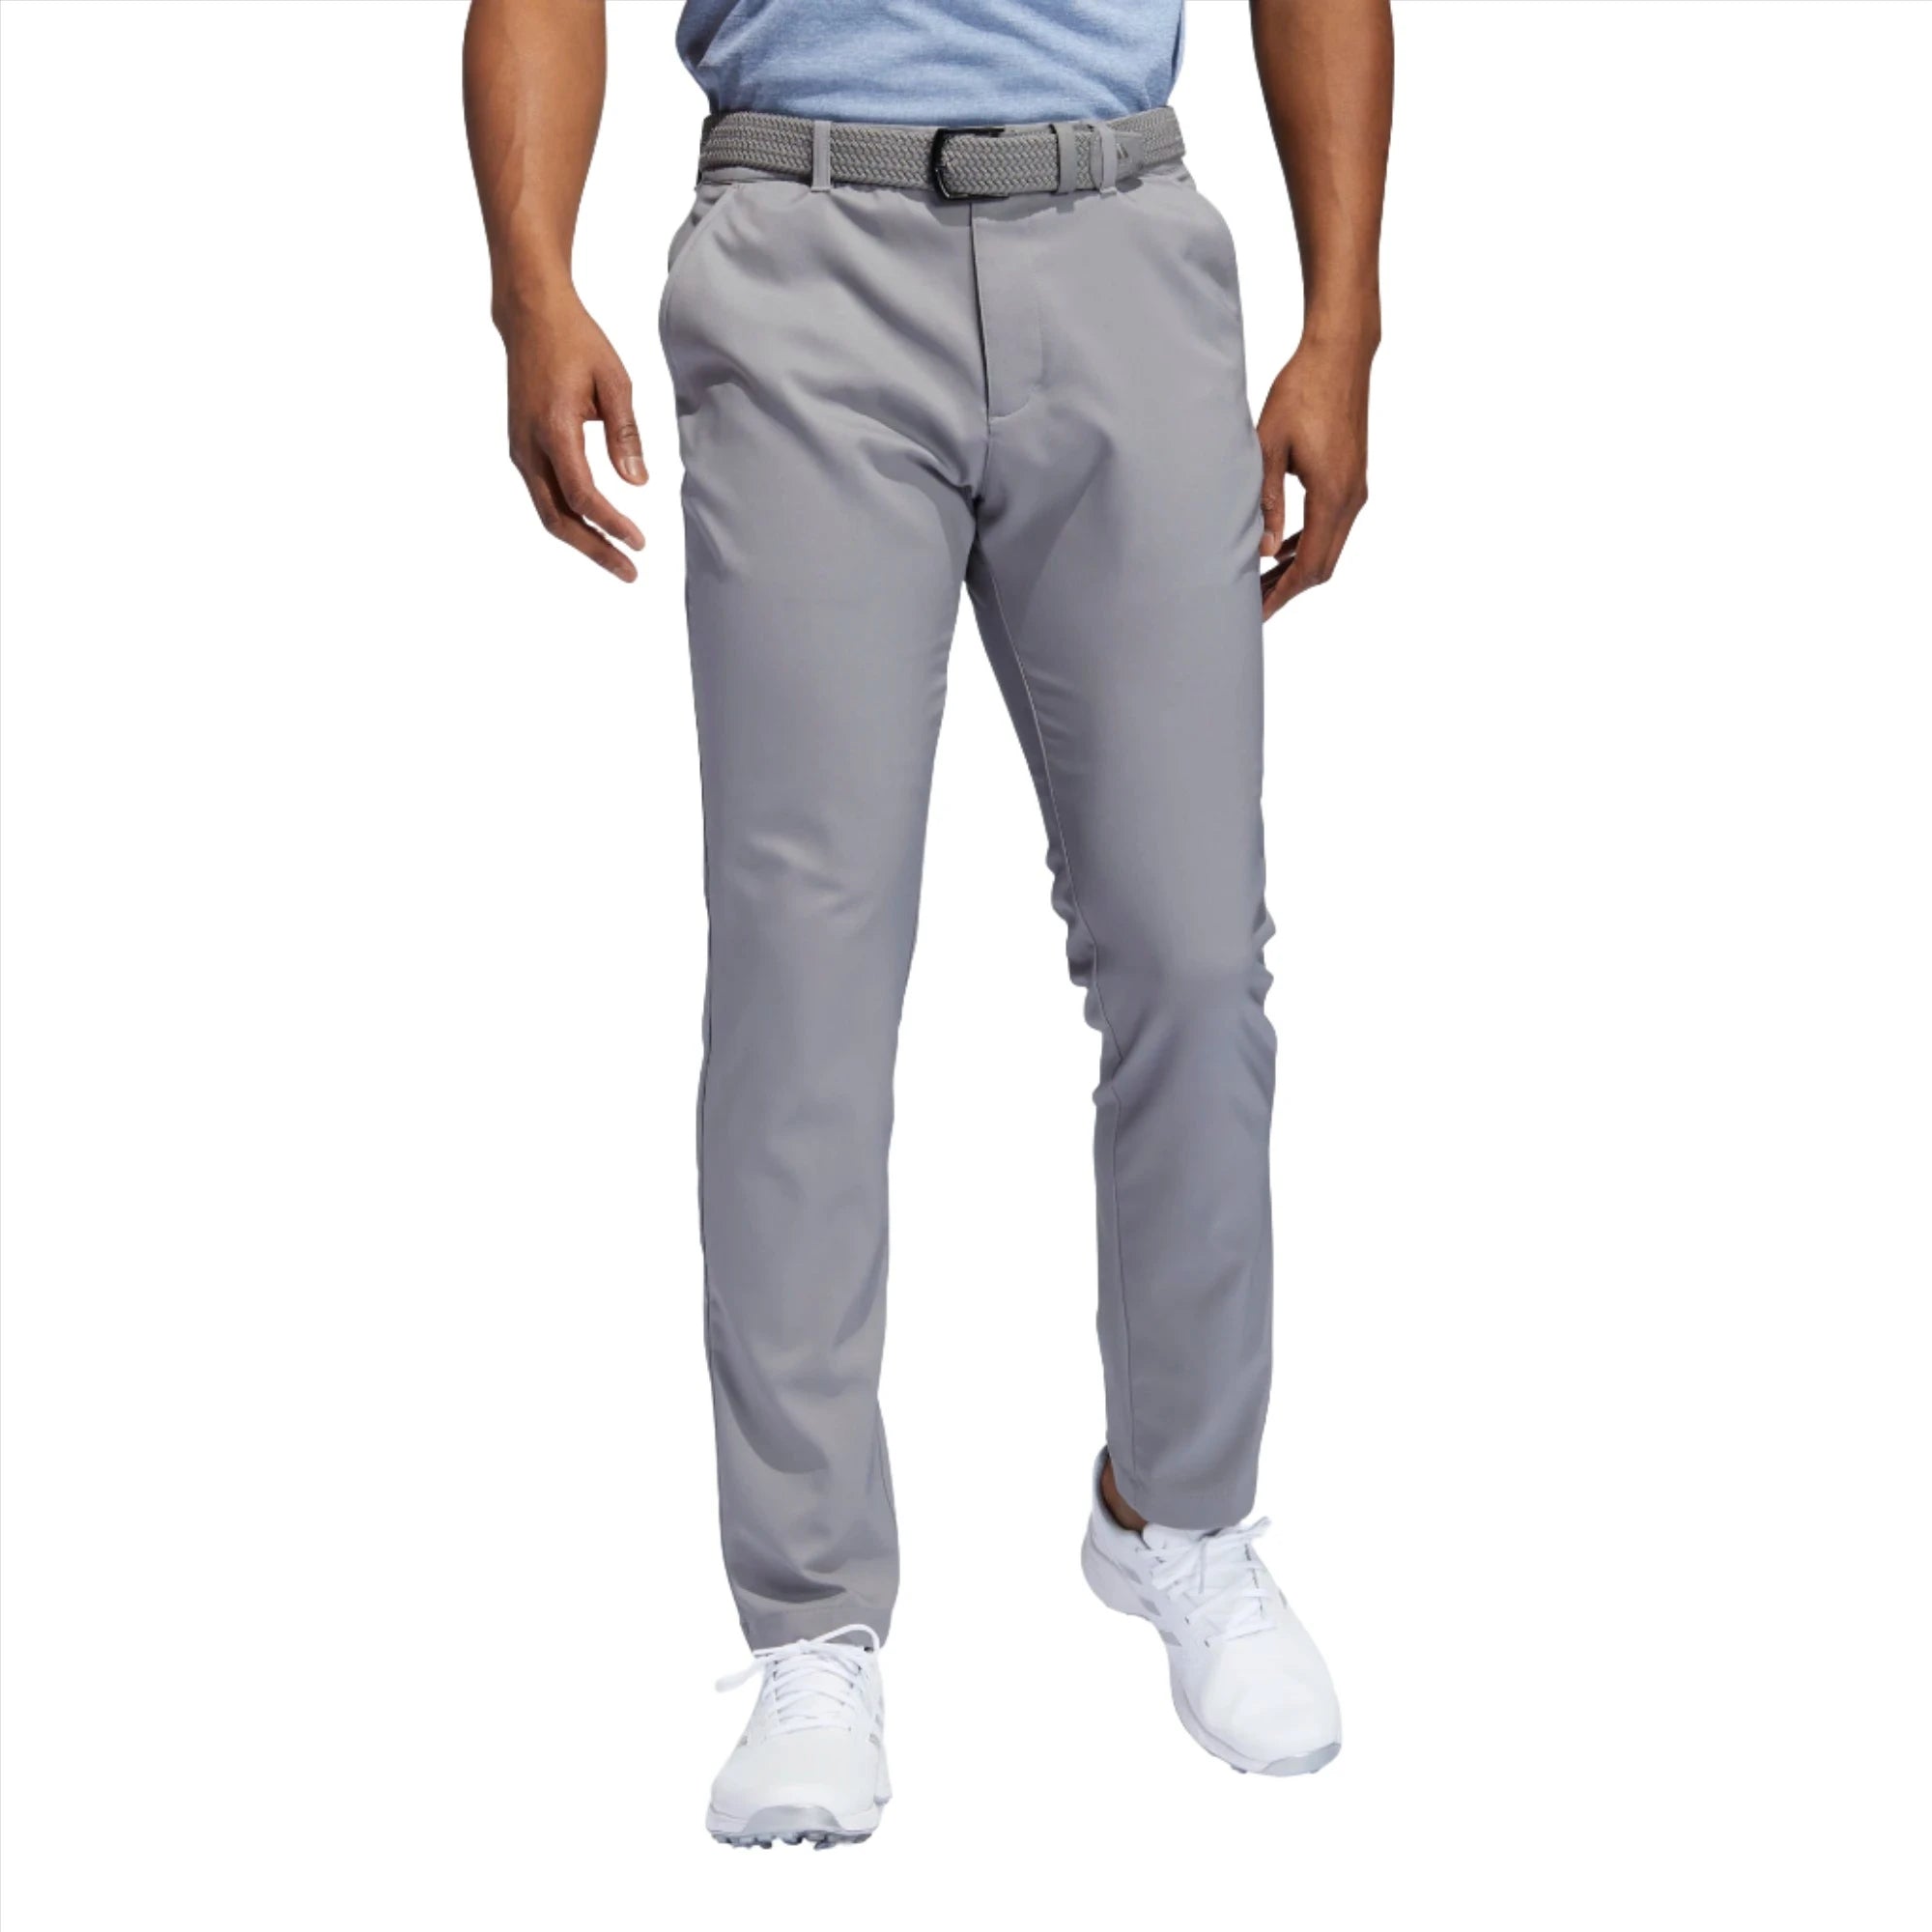 adidas Ultimate365 Tapered Golf Trousers ADIDAS MENS TROUSERS ADIDAS 